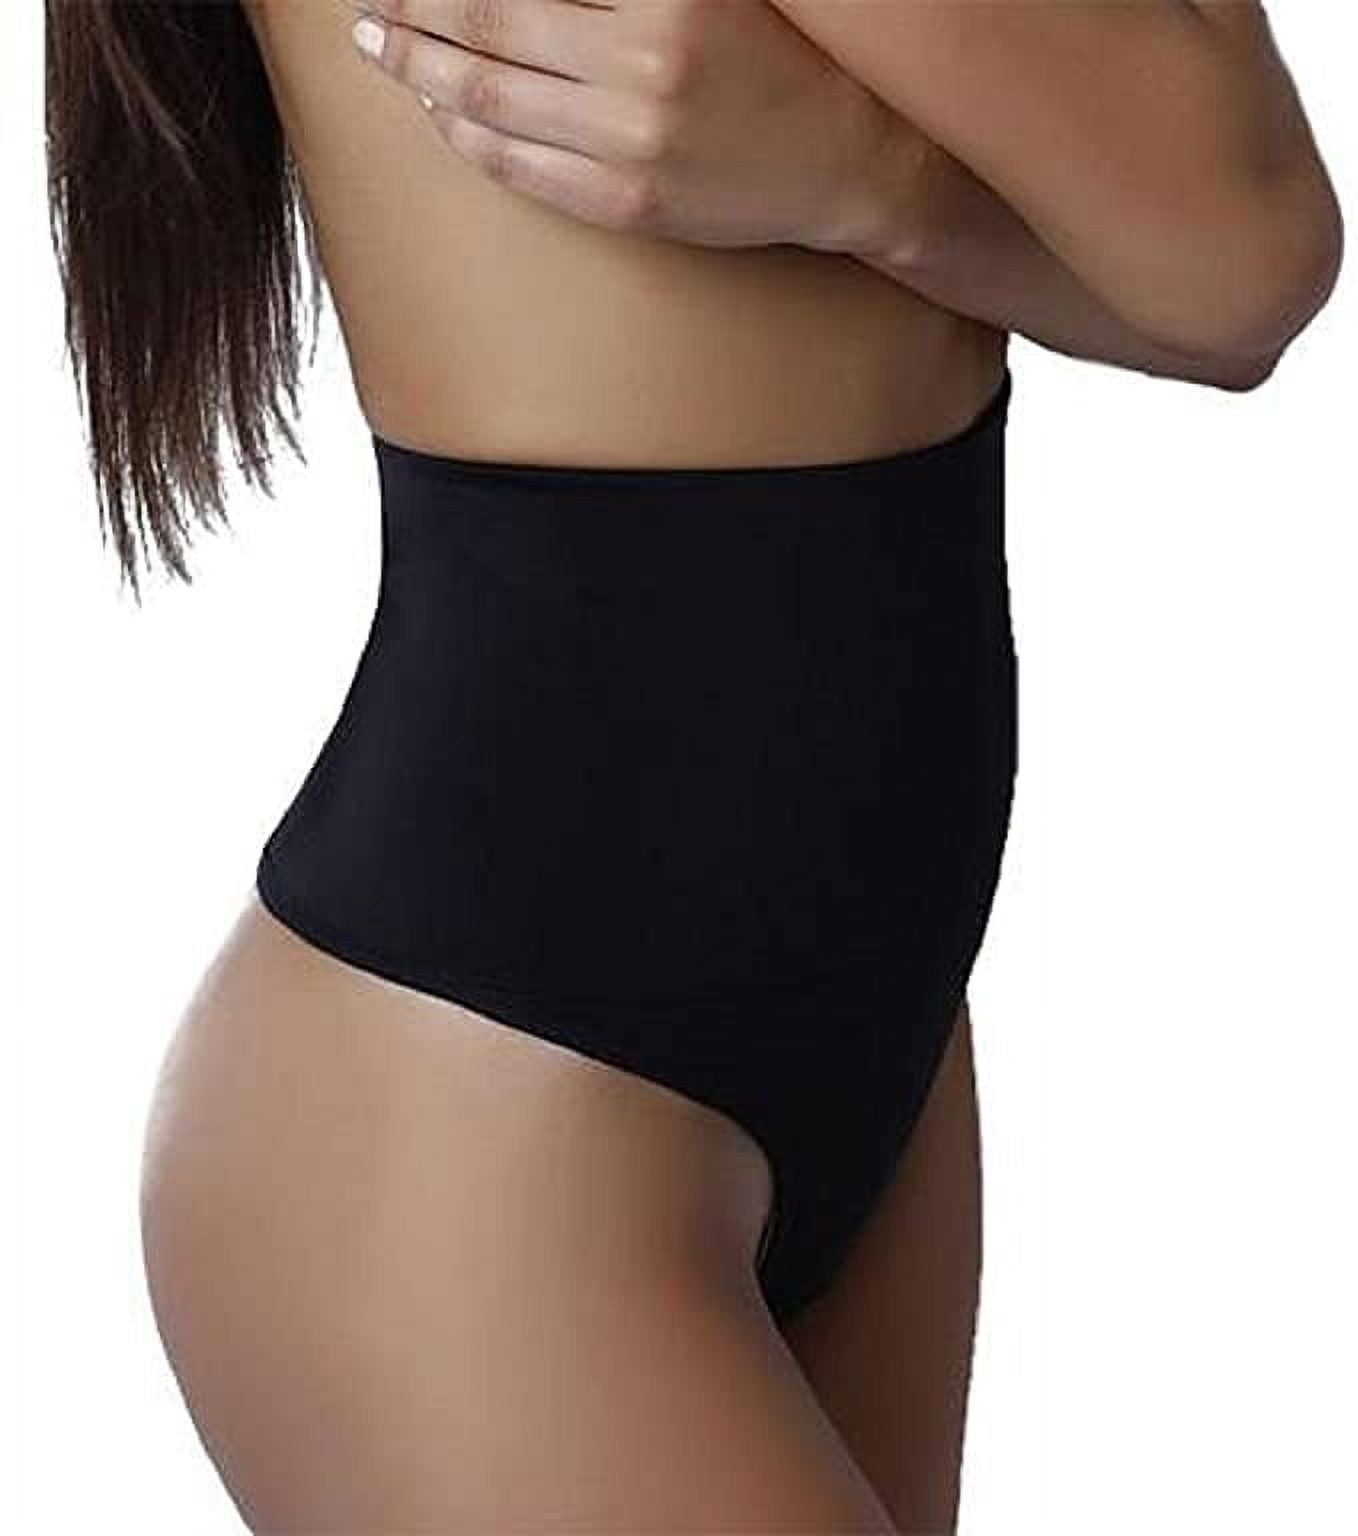 BODYSLIMMERS NANCY GANZ Women's Secretly Naked Firm Control Shaping Thong  Panty with Belly Band, Black, XXXX-Large/22 